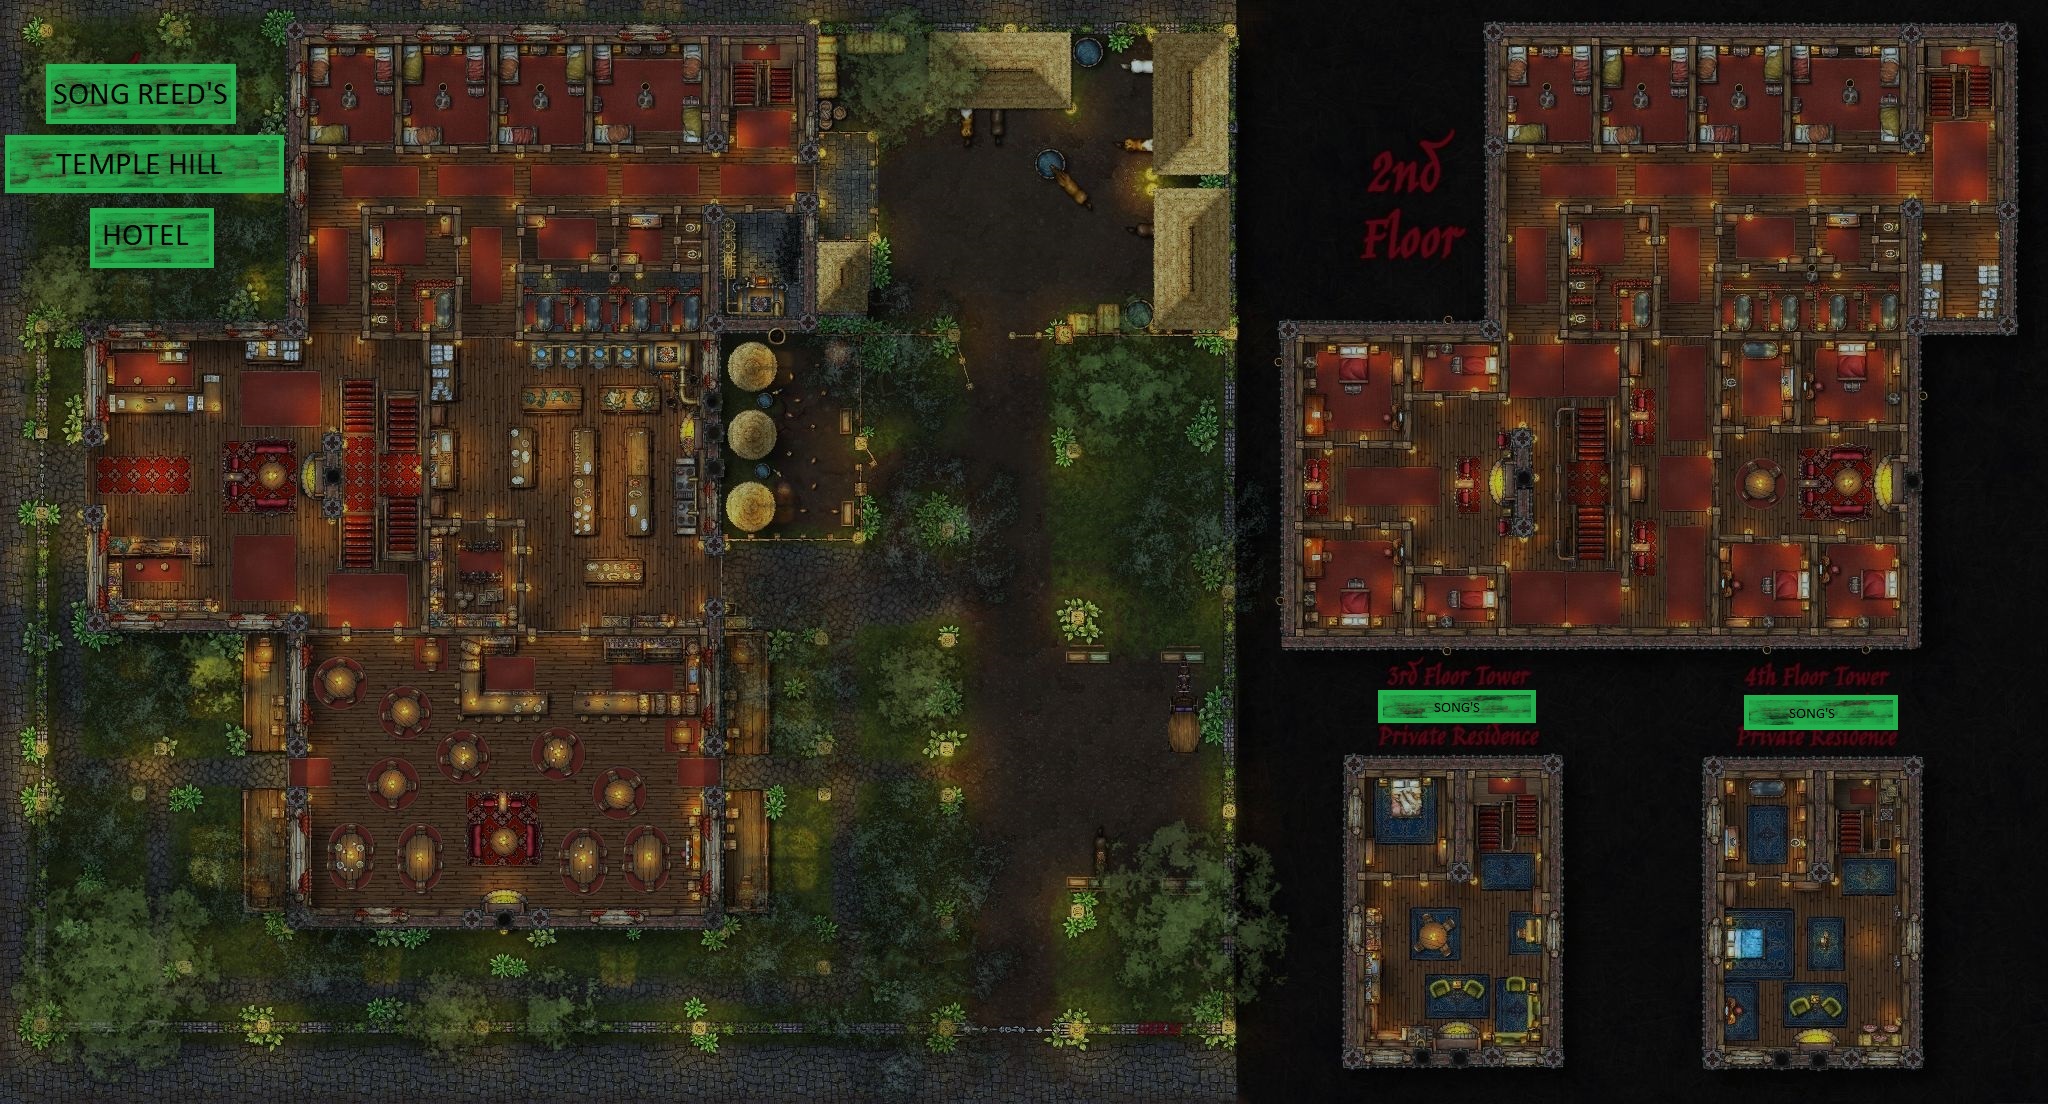 Temple Hill Hotel Base Map Image